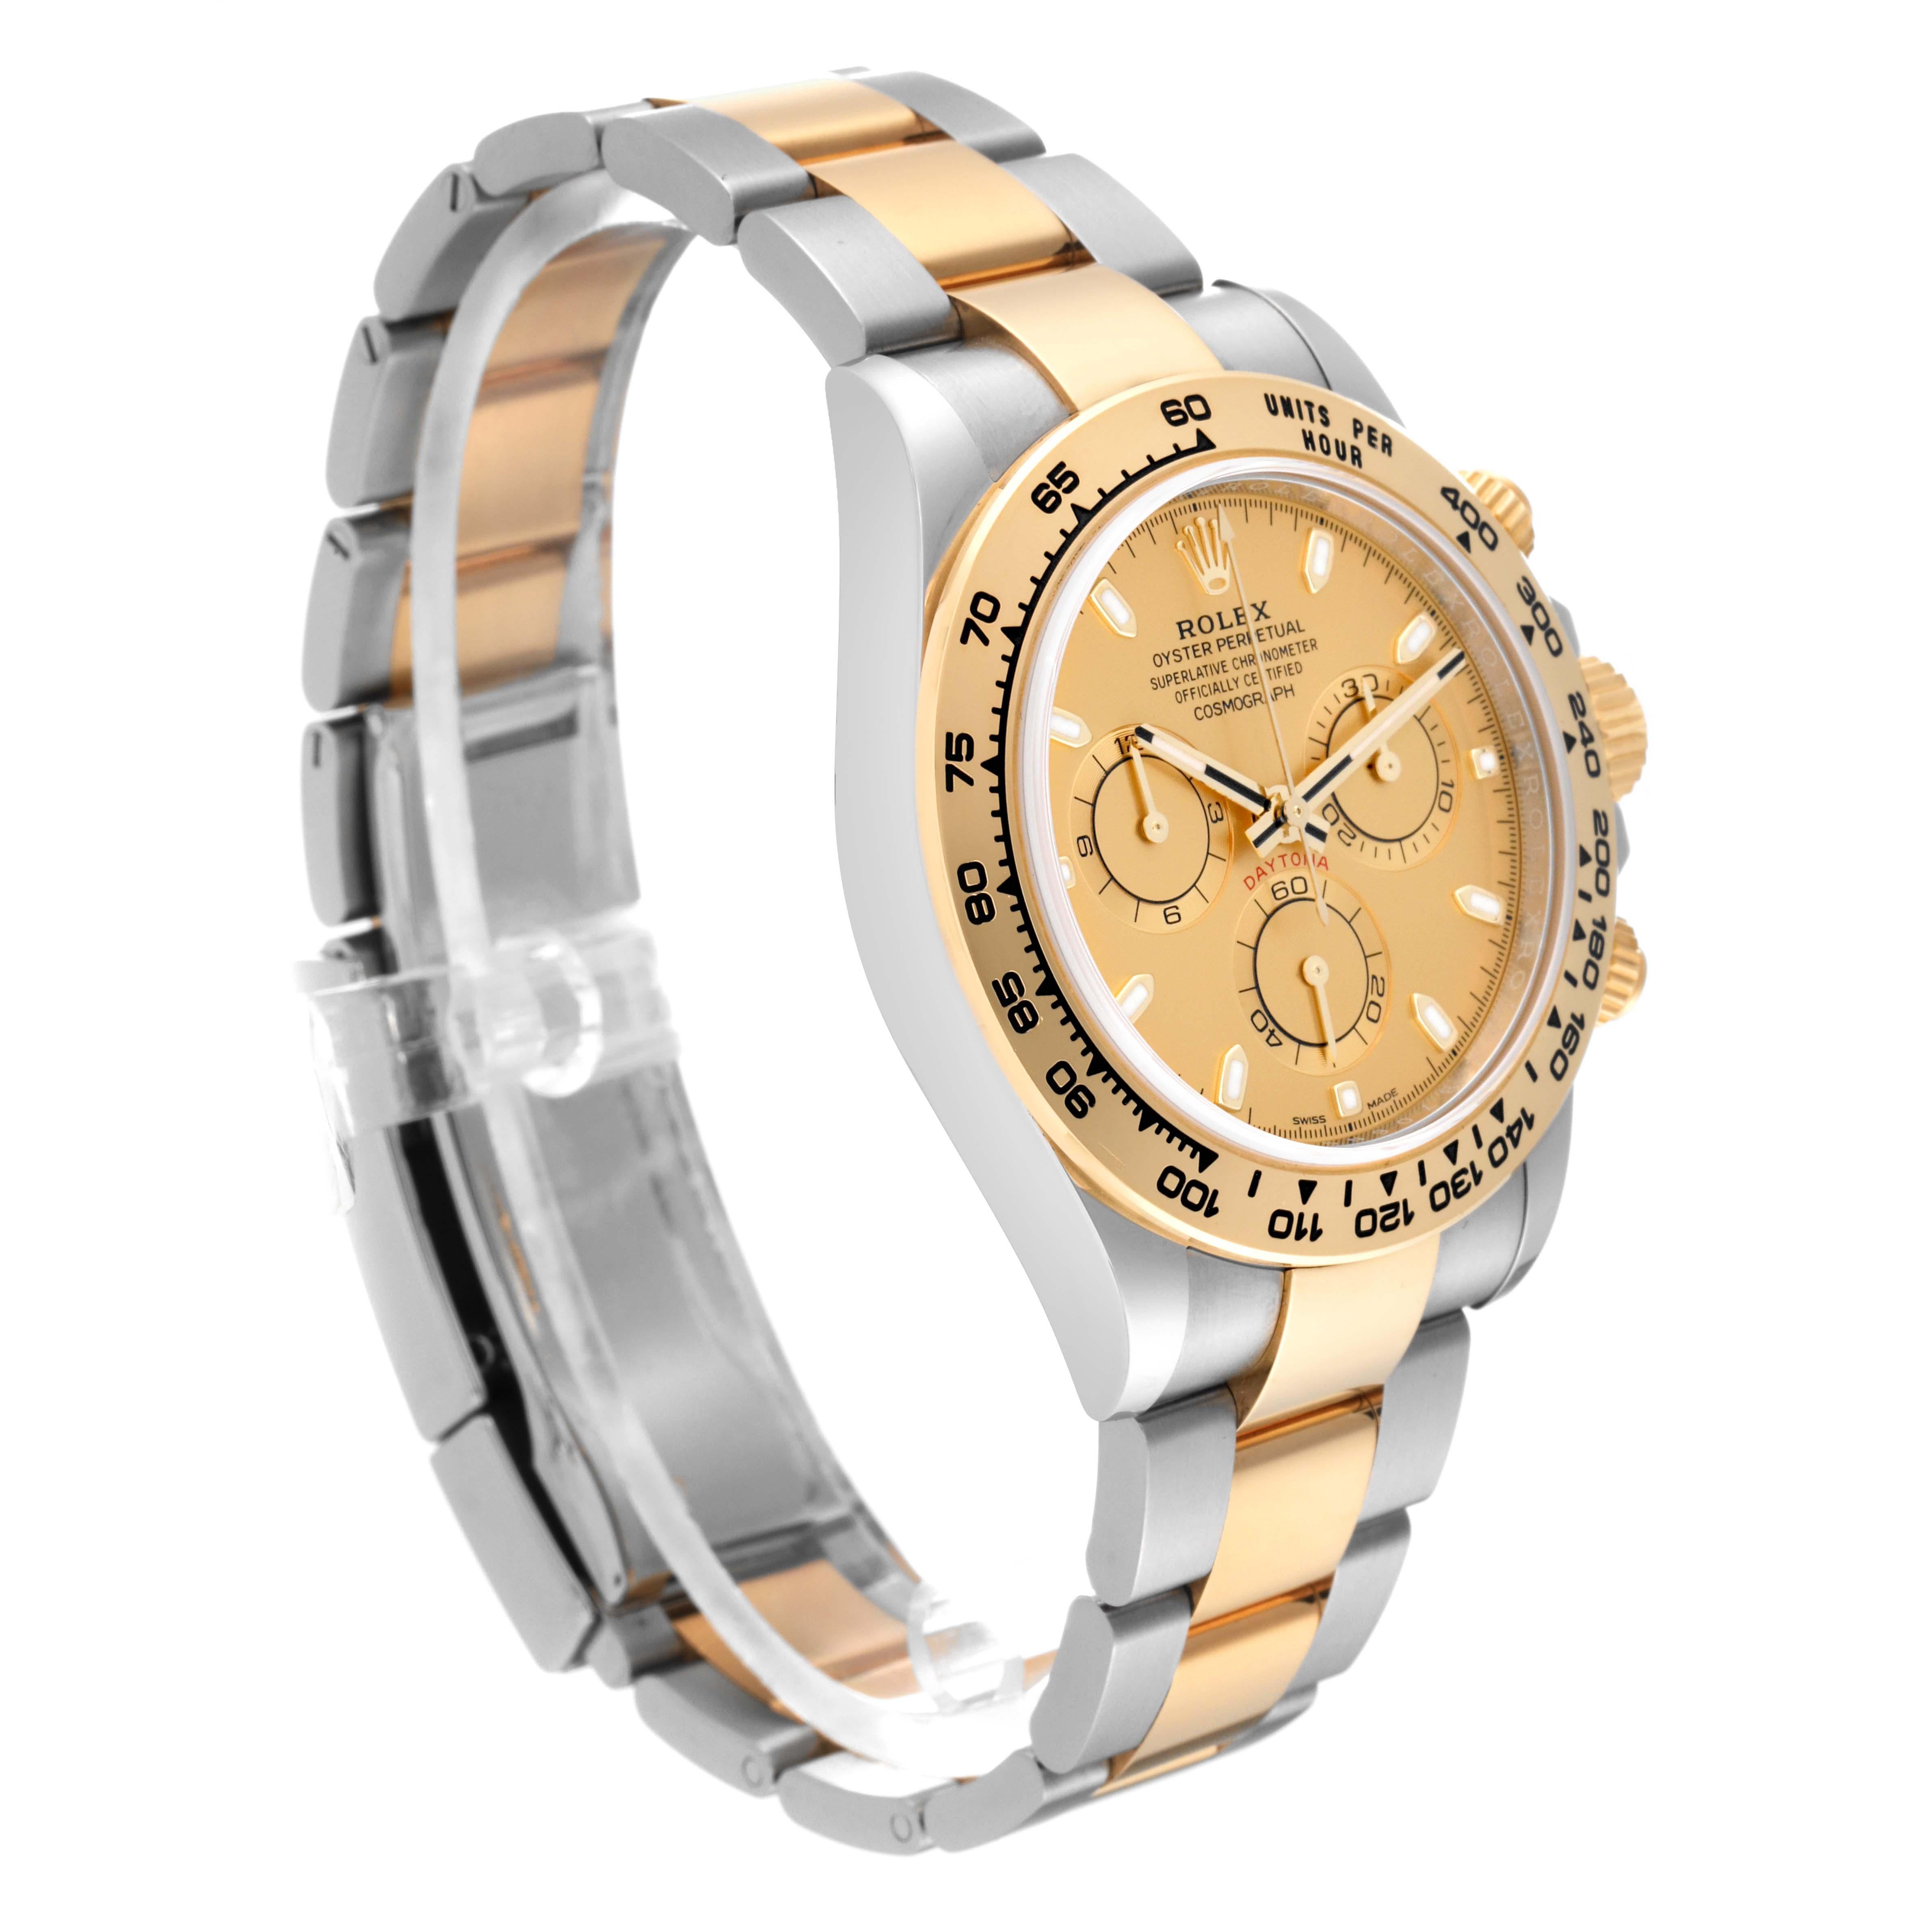 Rolex Daytona Champagne Dial Steel Yellow Gold Mens Watch 116503 Box Card For Sale 7